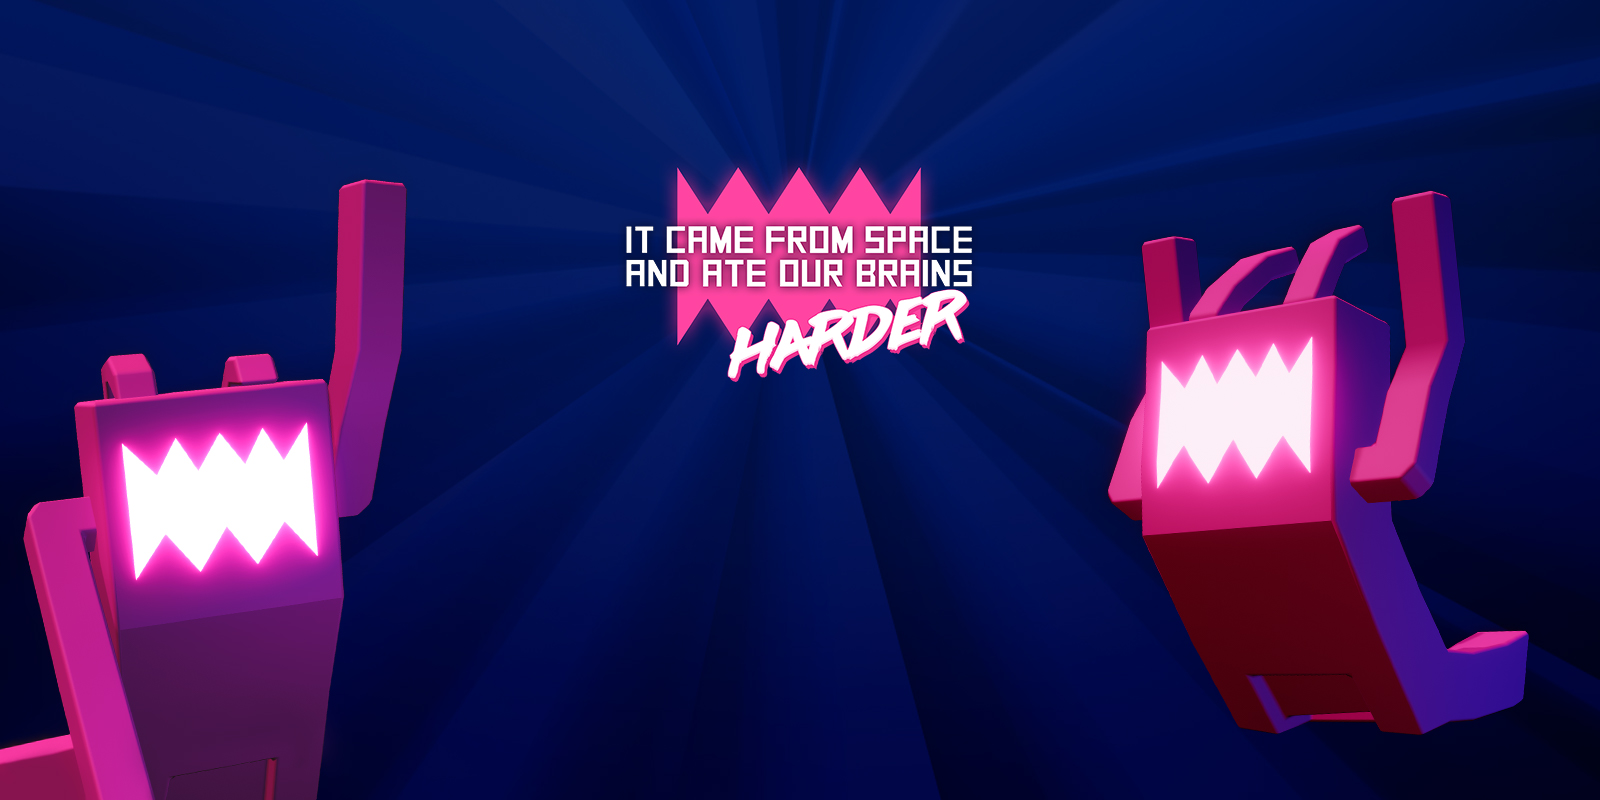 It came from space and ate our brains HARDER - header